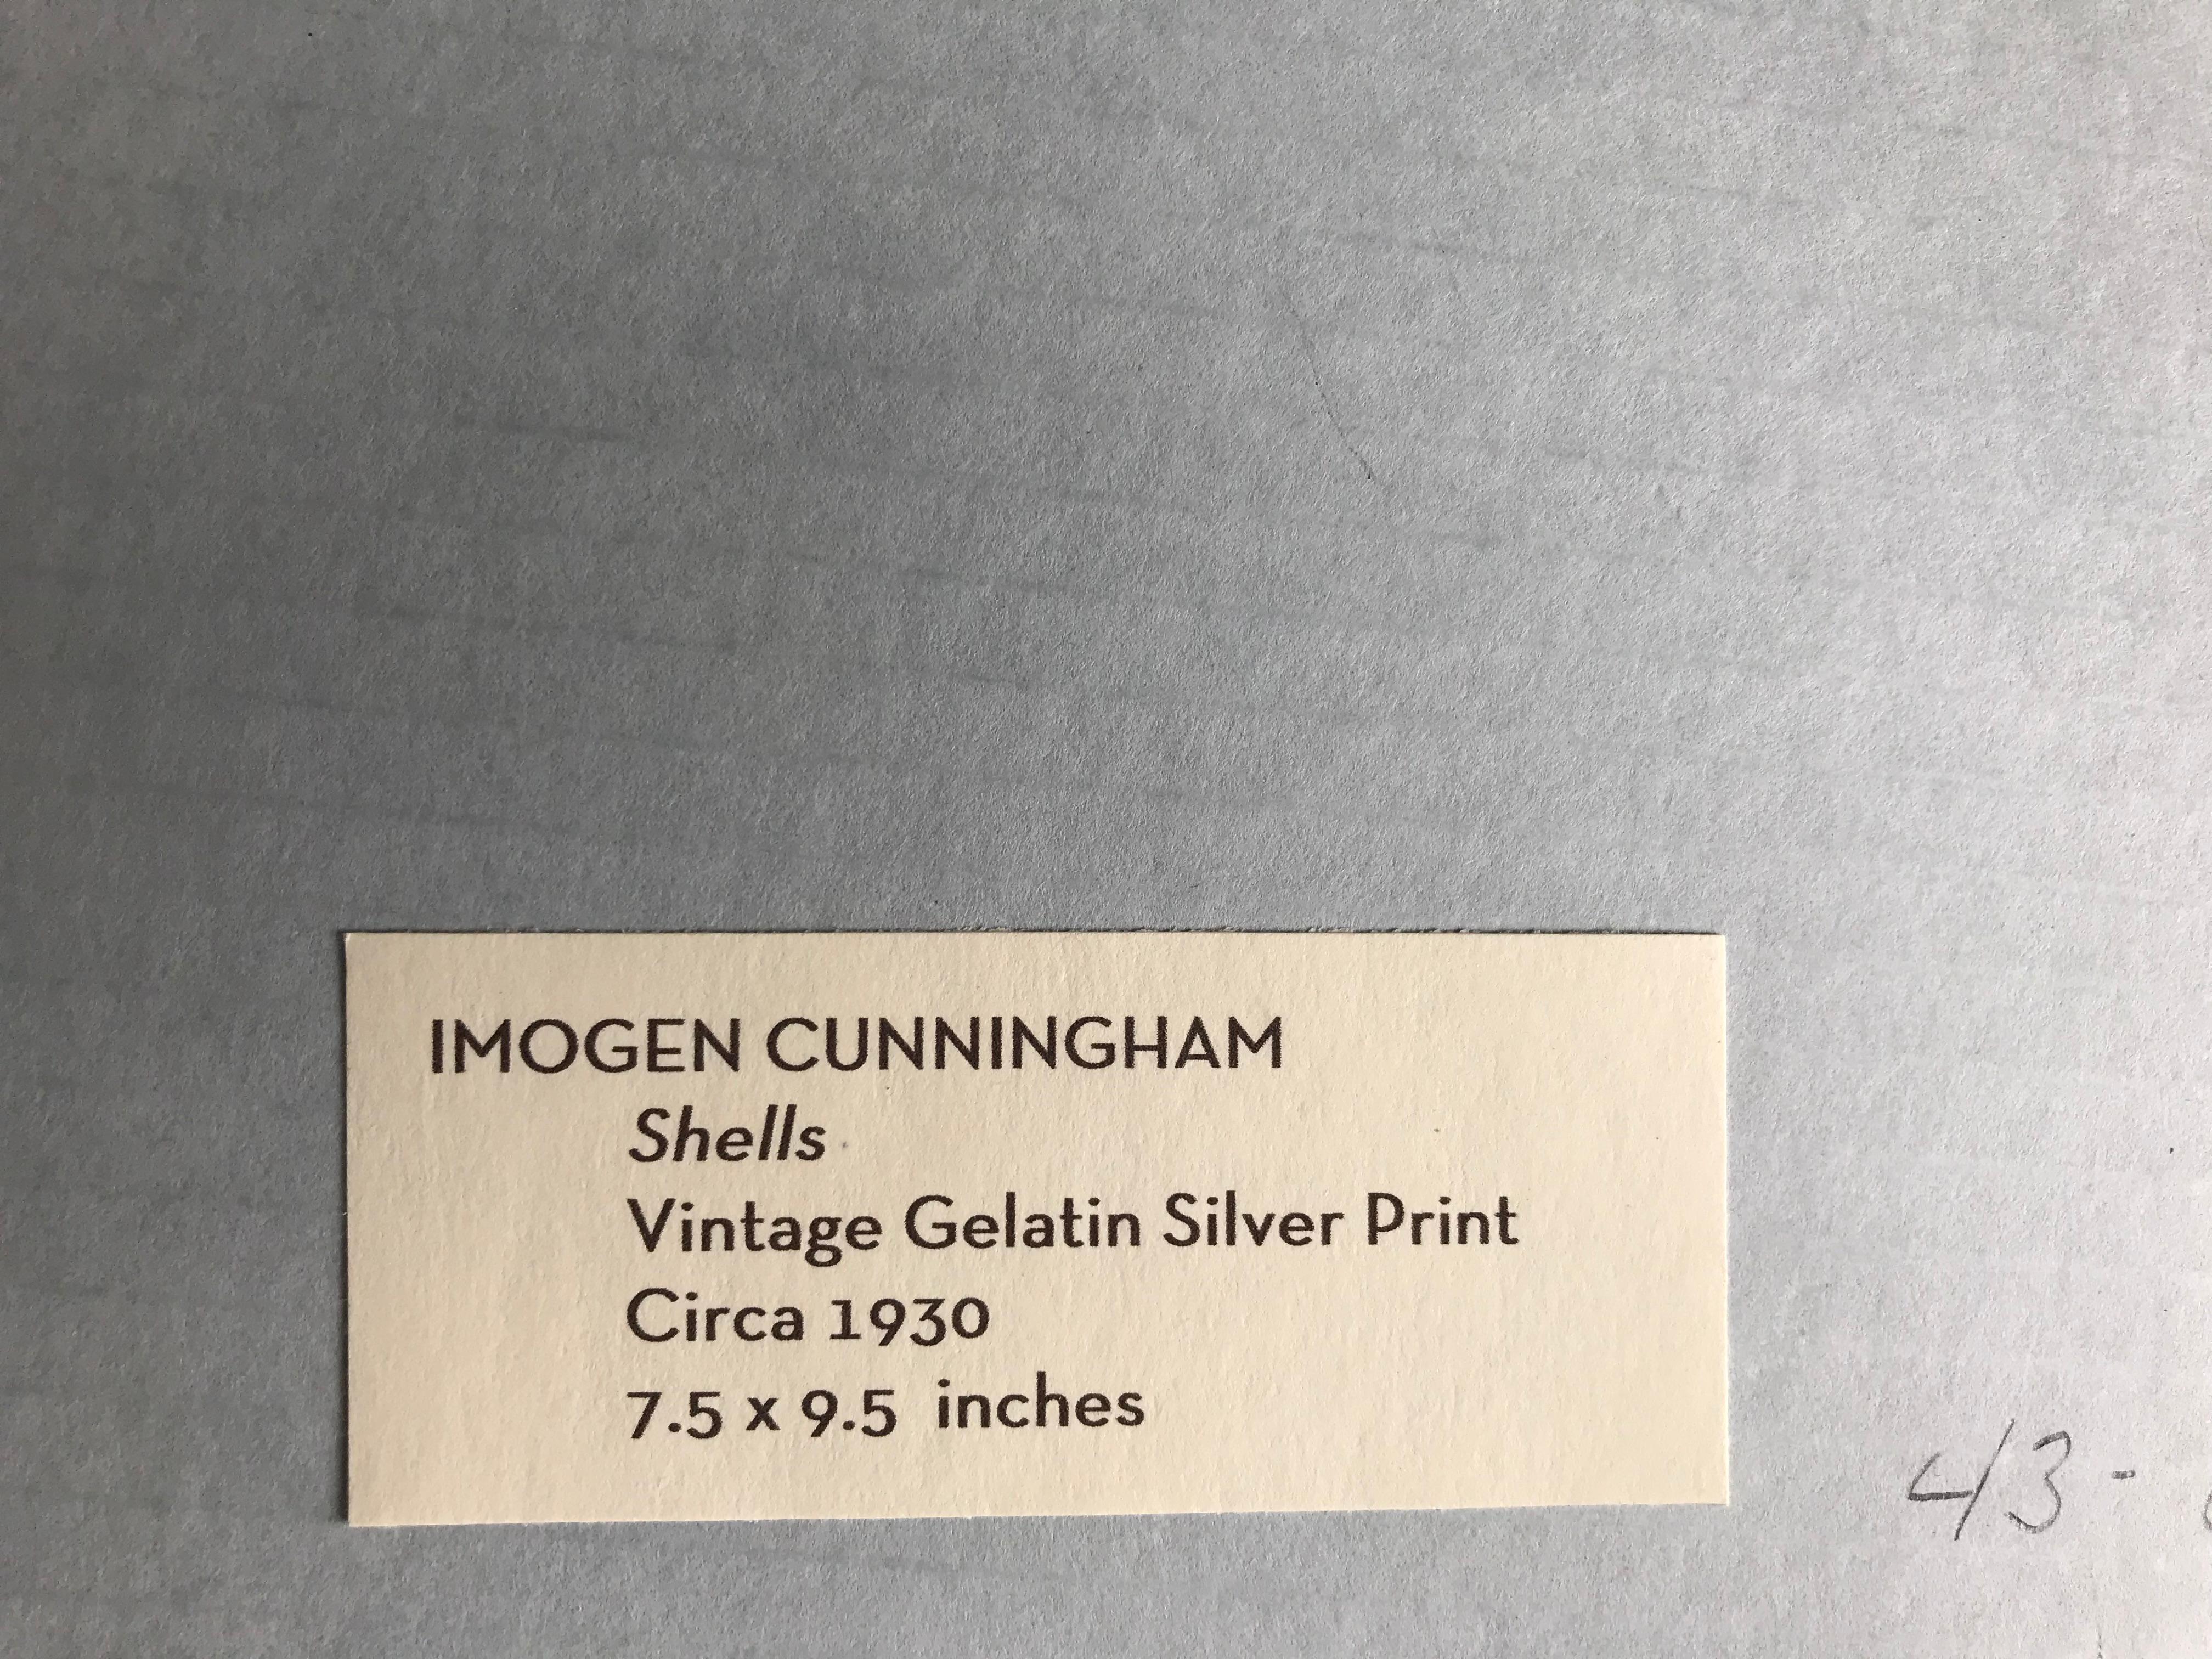 Rare and vintage signed Cunningham.  At auction would sell for high above this price. 
Black and White Photograph, Vintage, Still Life, Collage, Flora, Shells
Maybe unique photograph

Imogen Cunningham, one of the first professional female